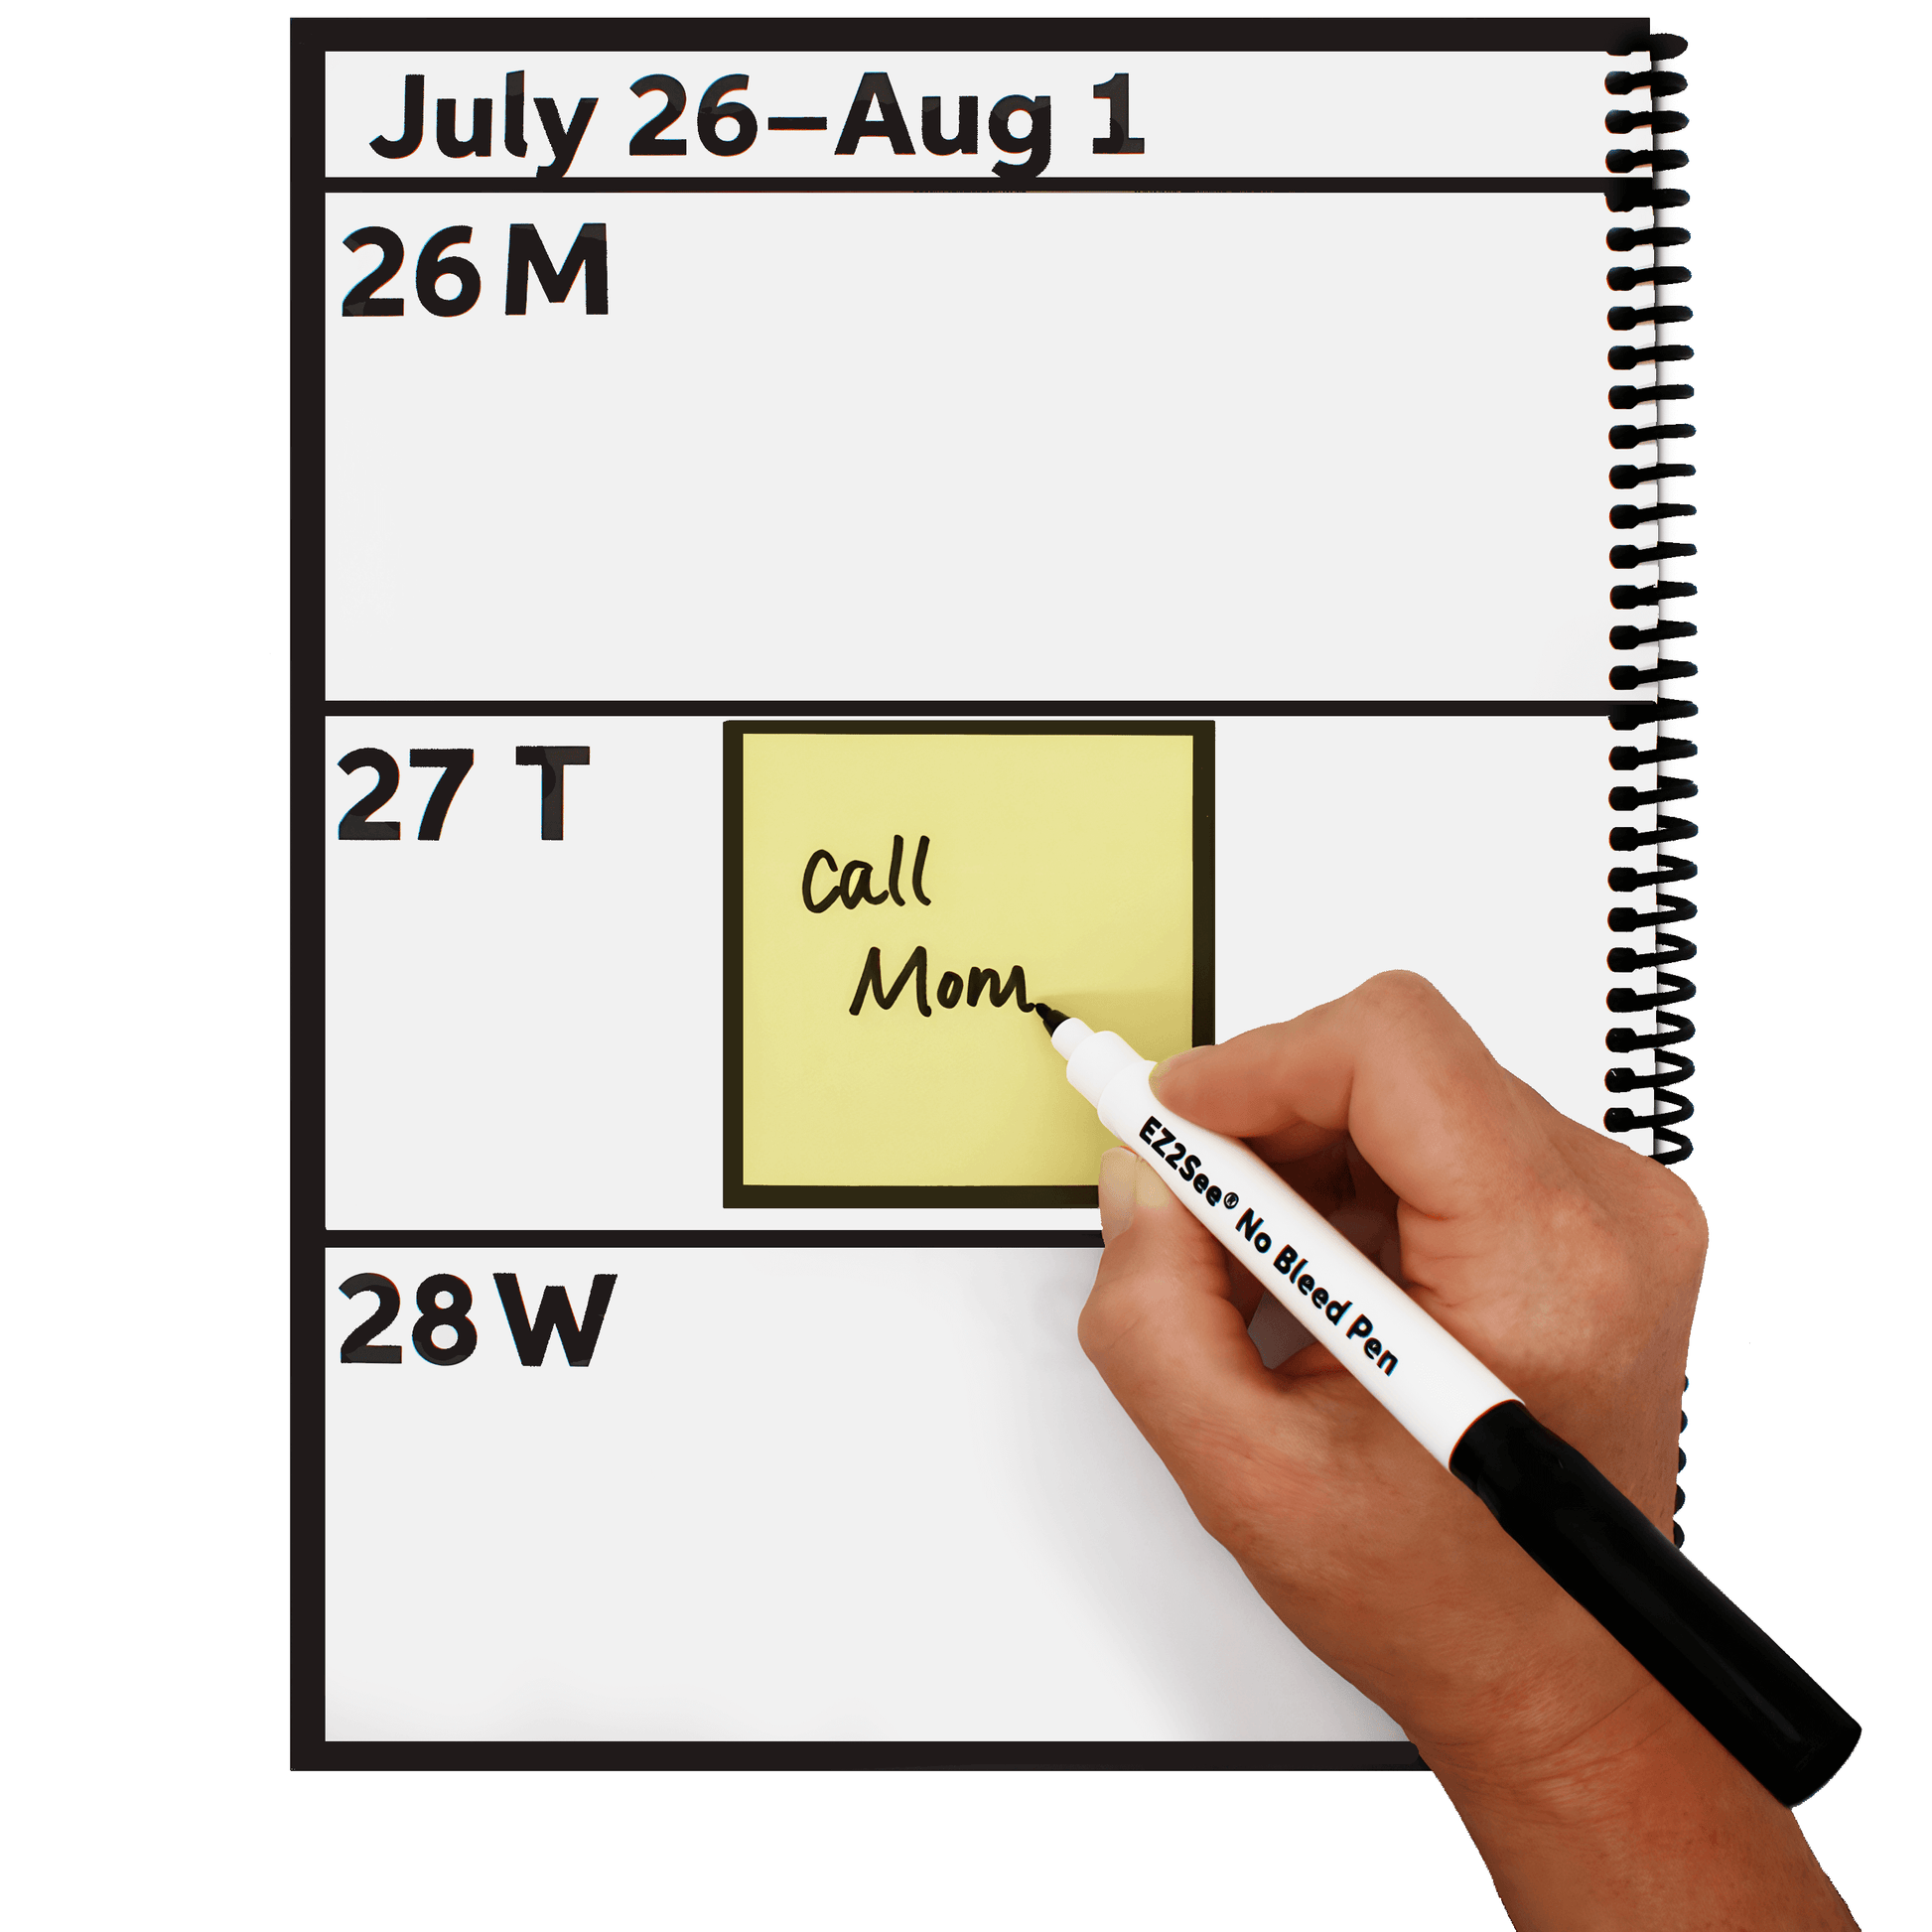 Someone writing with pen on EZ2see calendar with sticky note